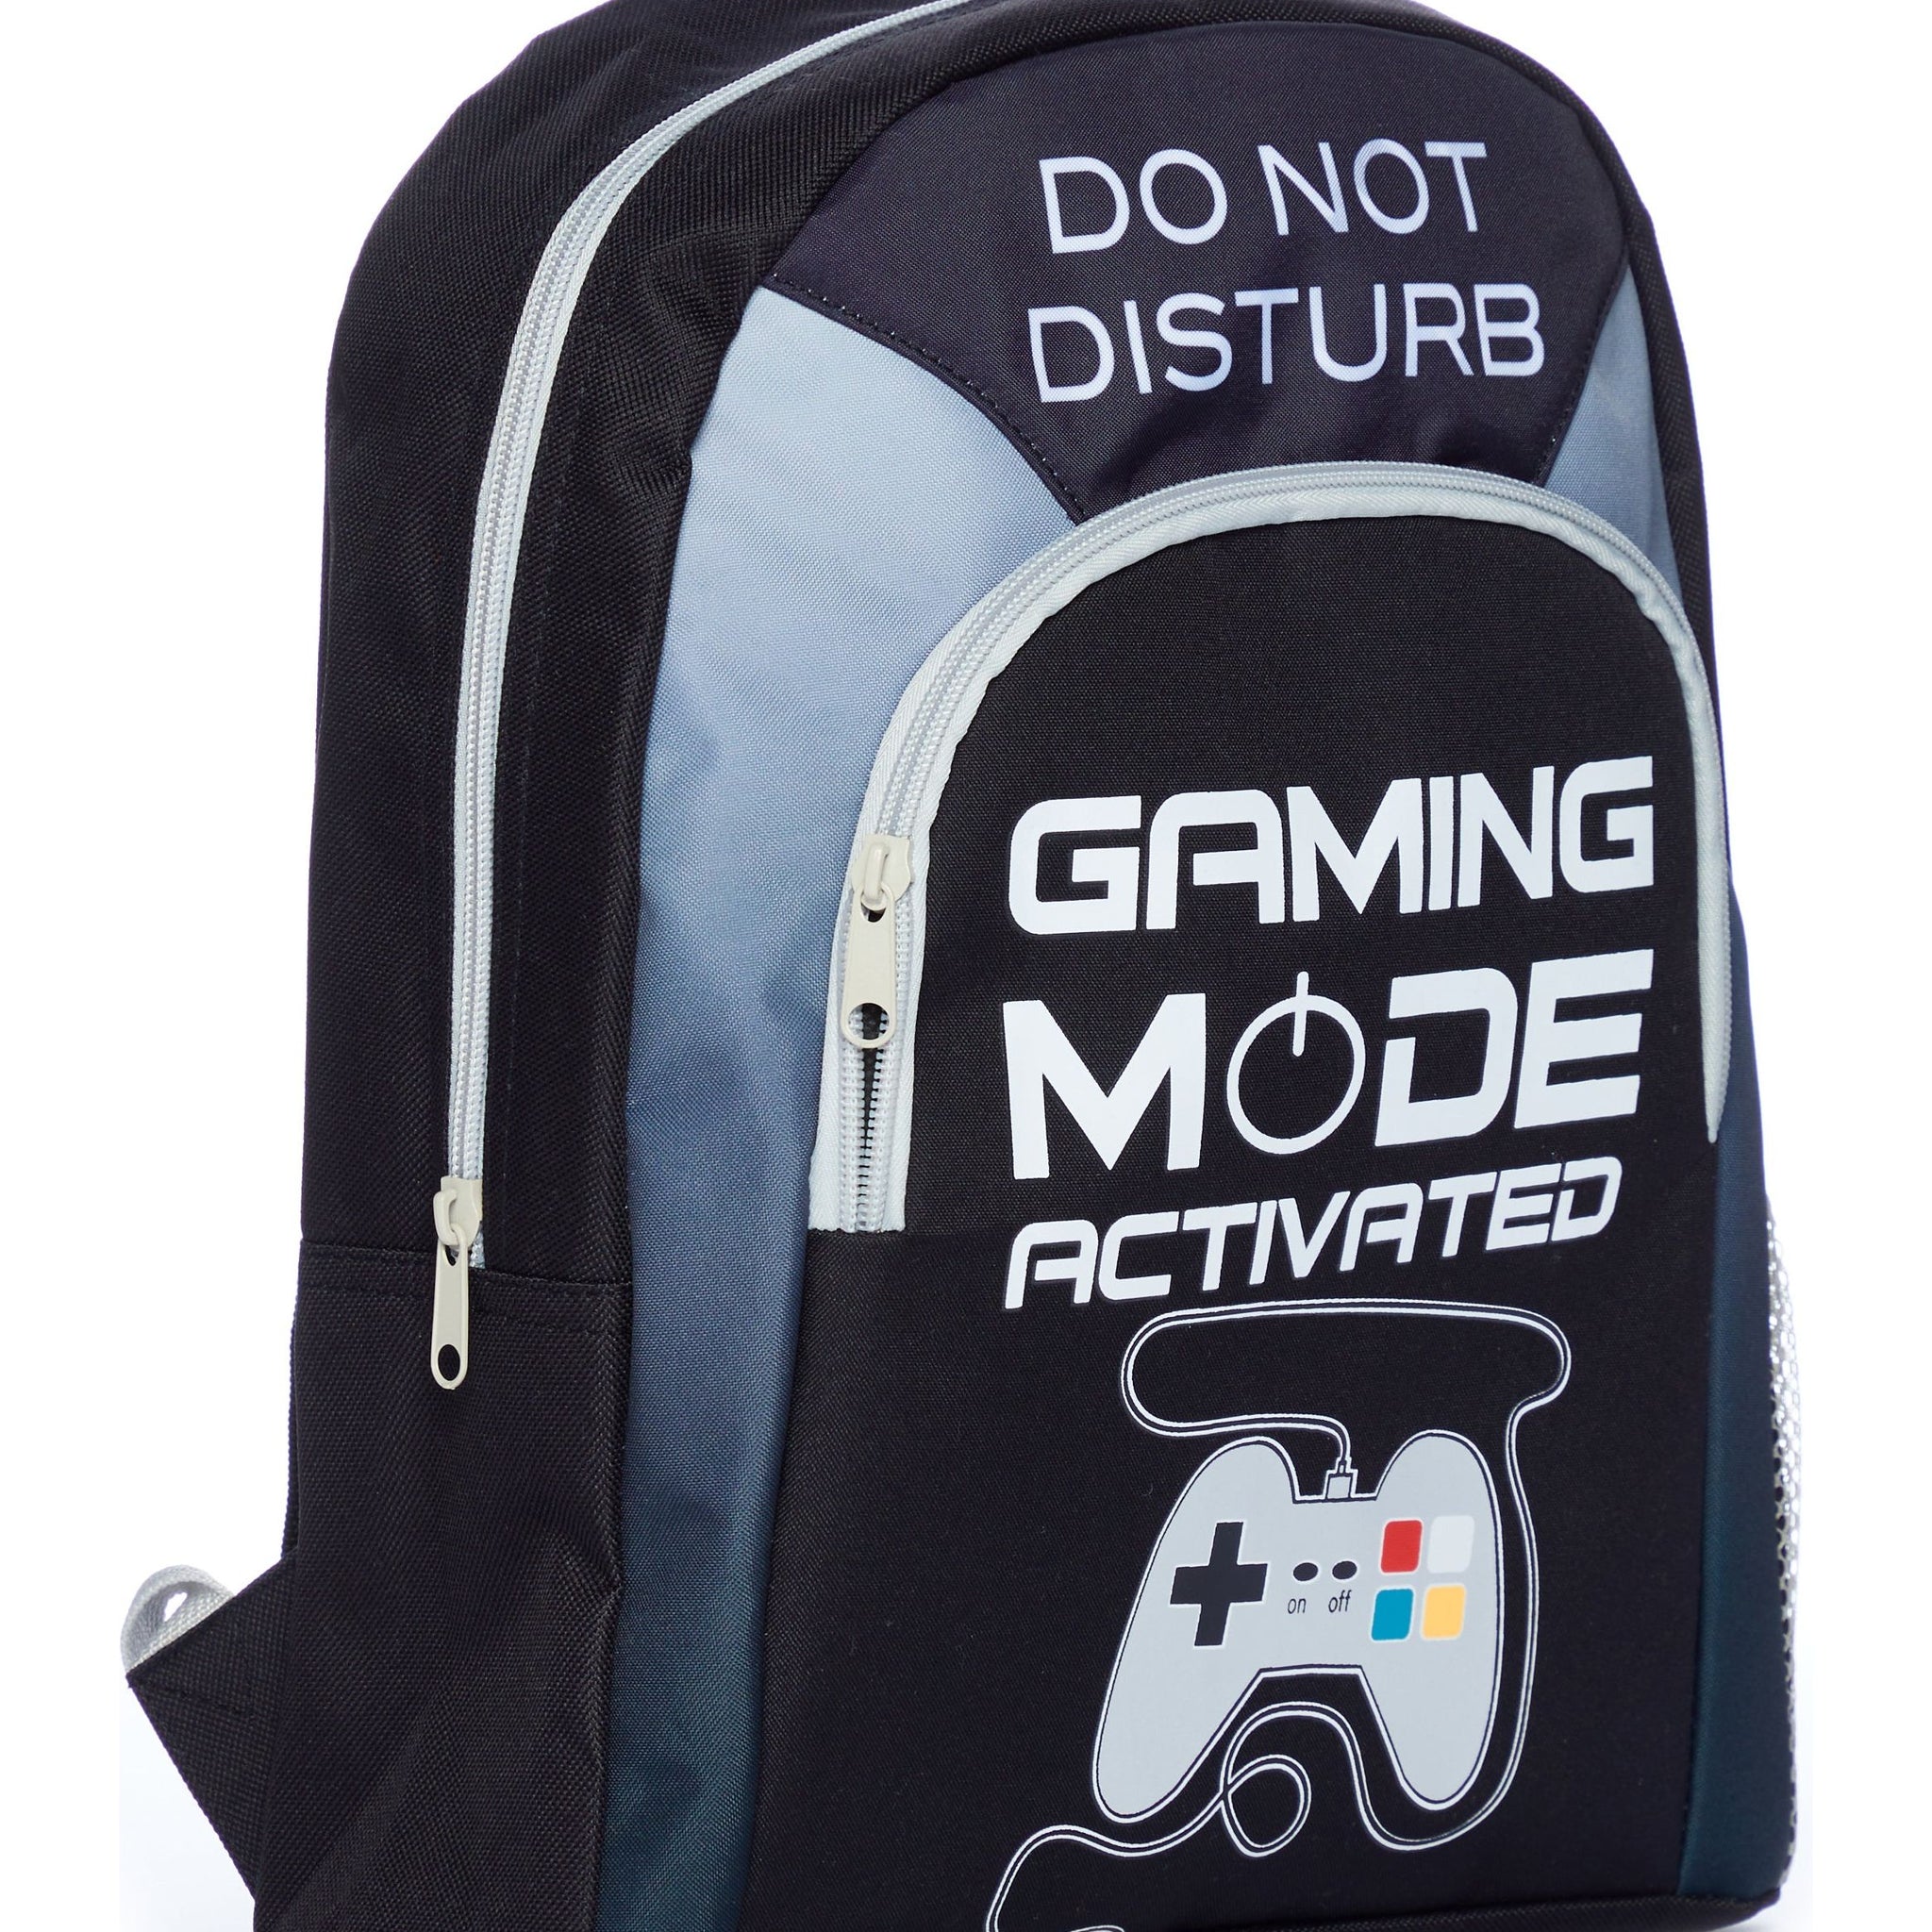 Do Not Disturb Gaming Mode Activated School Bag, Kids Boys Gamer Backpack